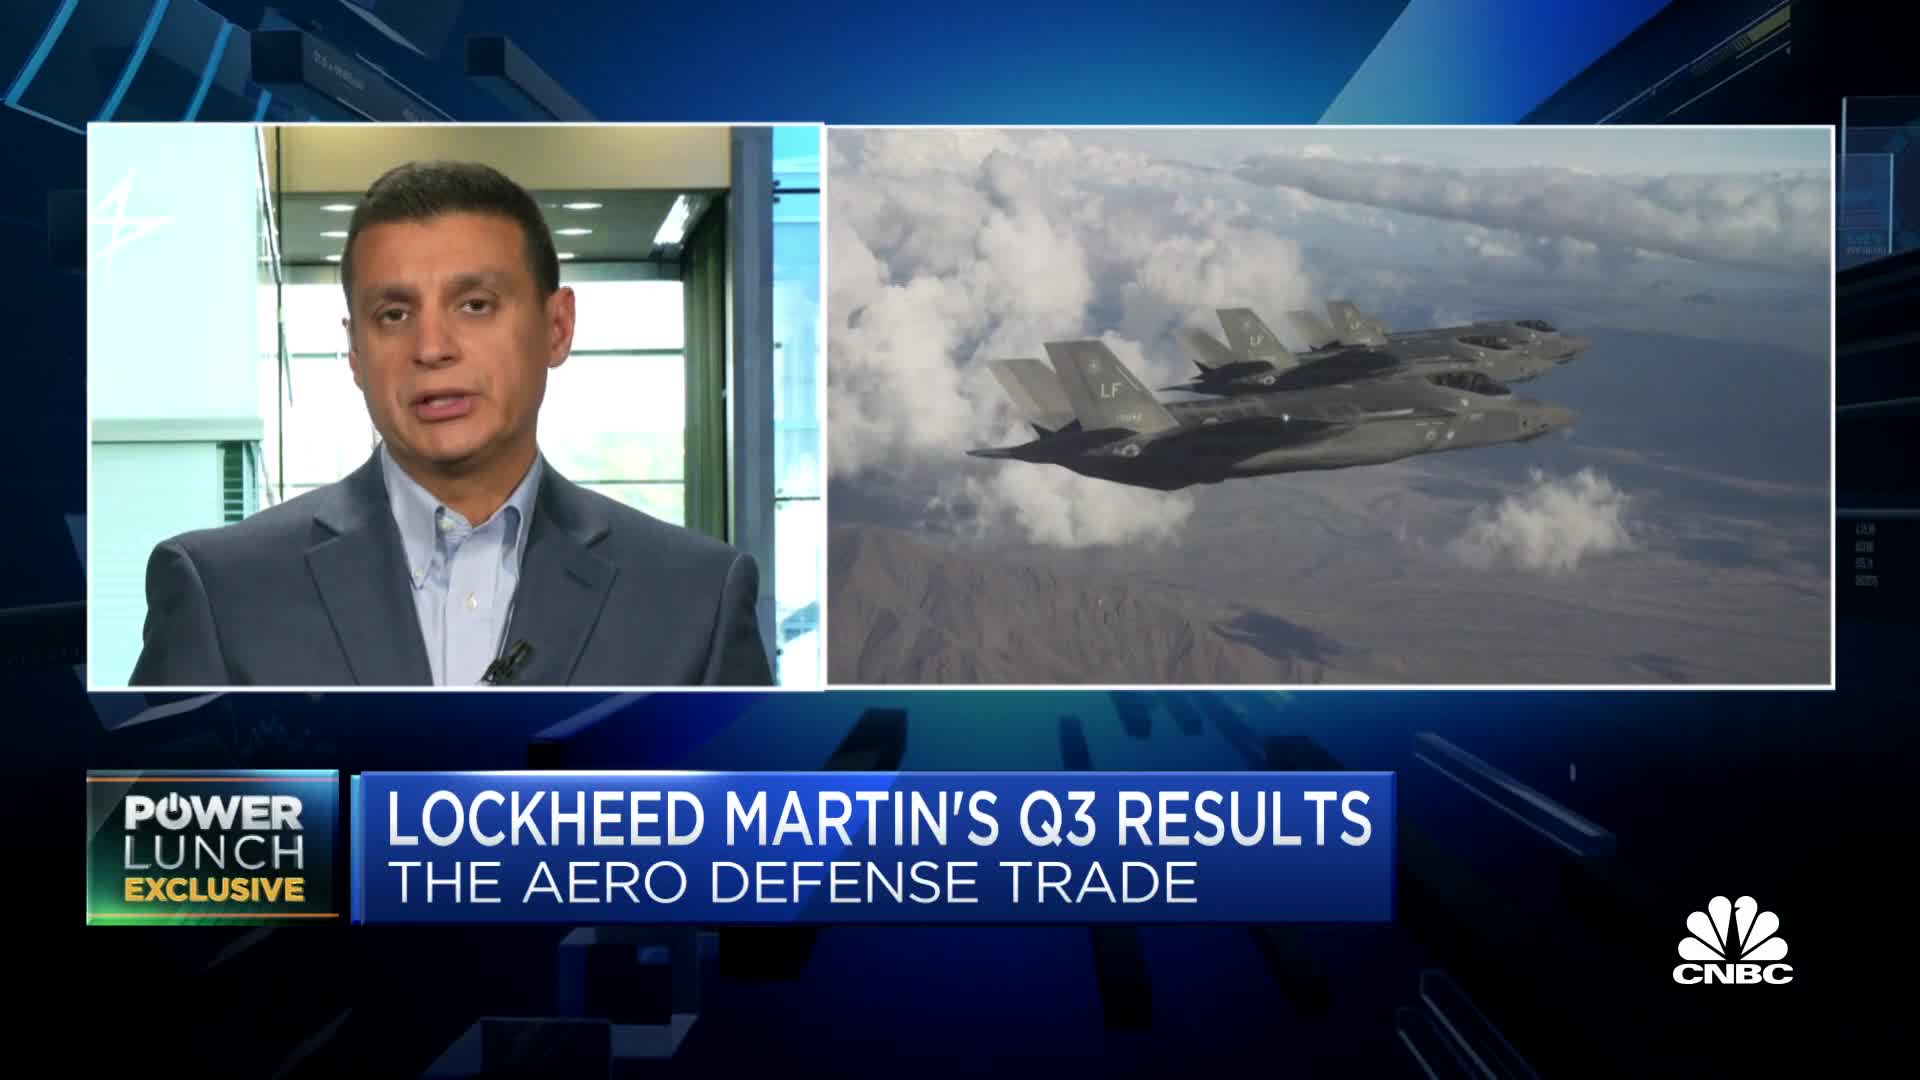 lockheed-martin-cfo-discusses-efforts-to-meet-increased-demand-for-weapons-in-ukraine